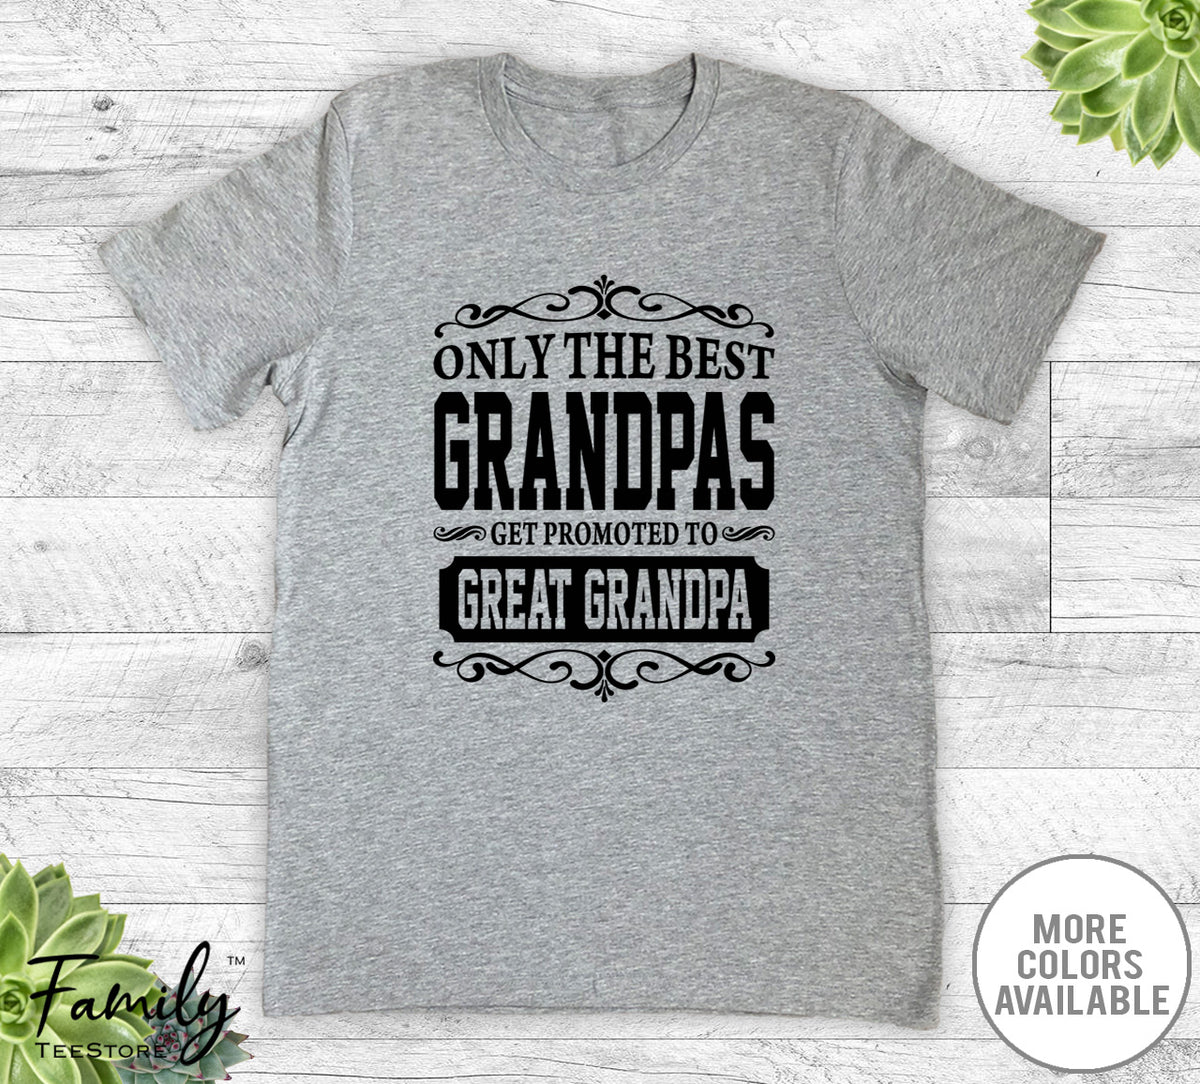 Only The Best Grandpas Get Promoted To Great Grandpa - Unisex T-shirt - Great Grandpa Shirt - Great Grandpa Gift - familyteeprints